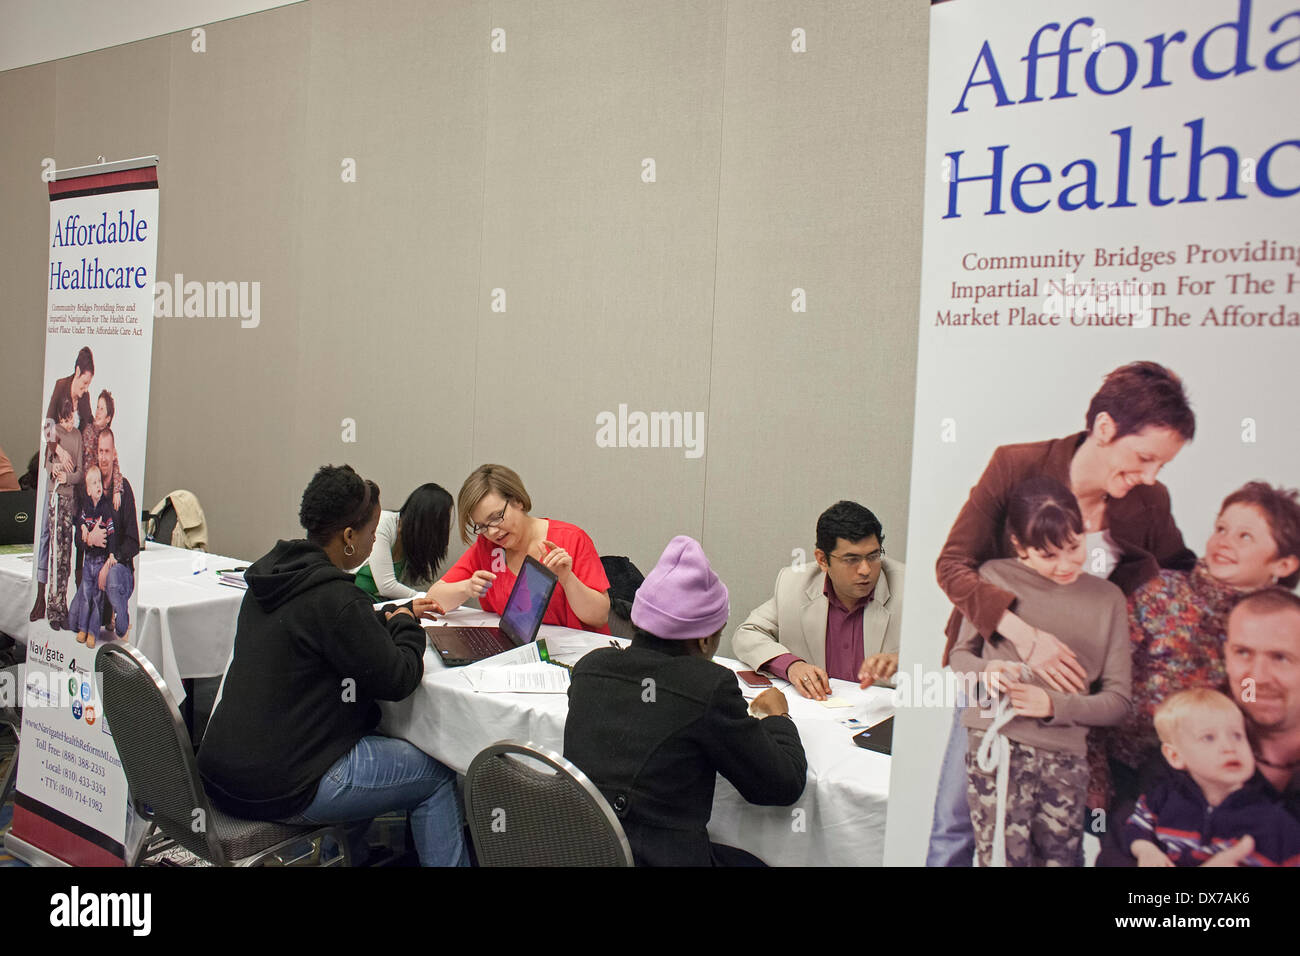 Detroit, Michigan - Health care 'navigators' sign people up for health insurance plans under the Affordable Care Act. © Jim West/Alamy Live News Stock Photo